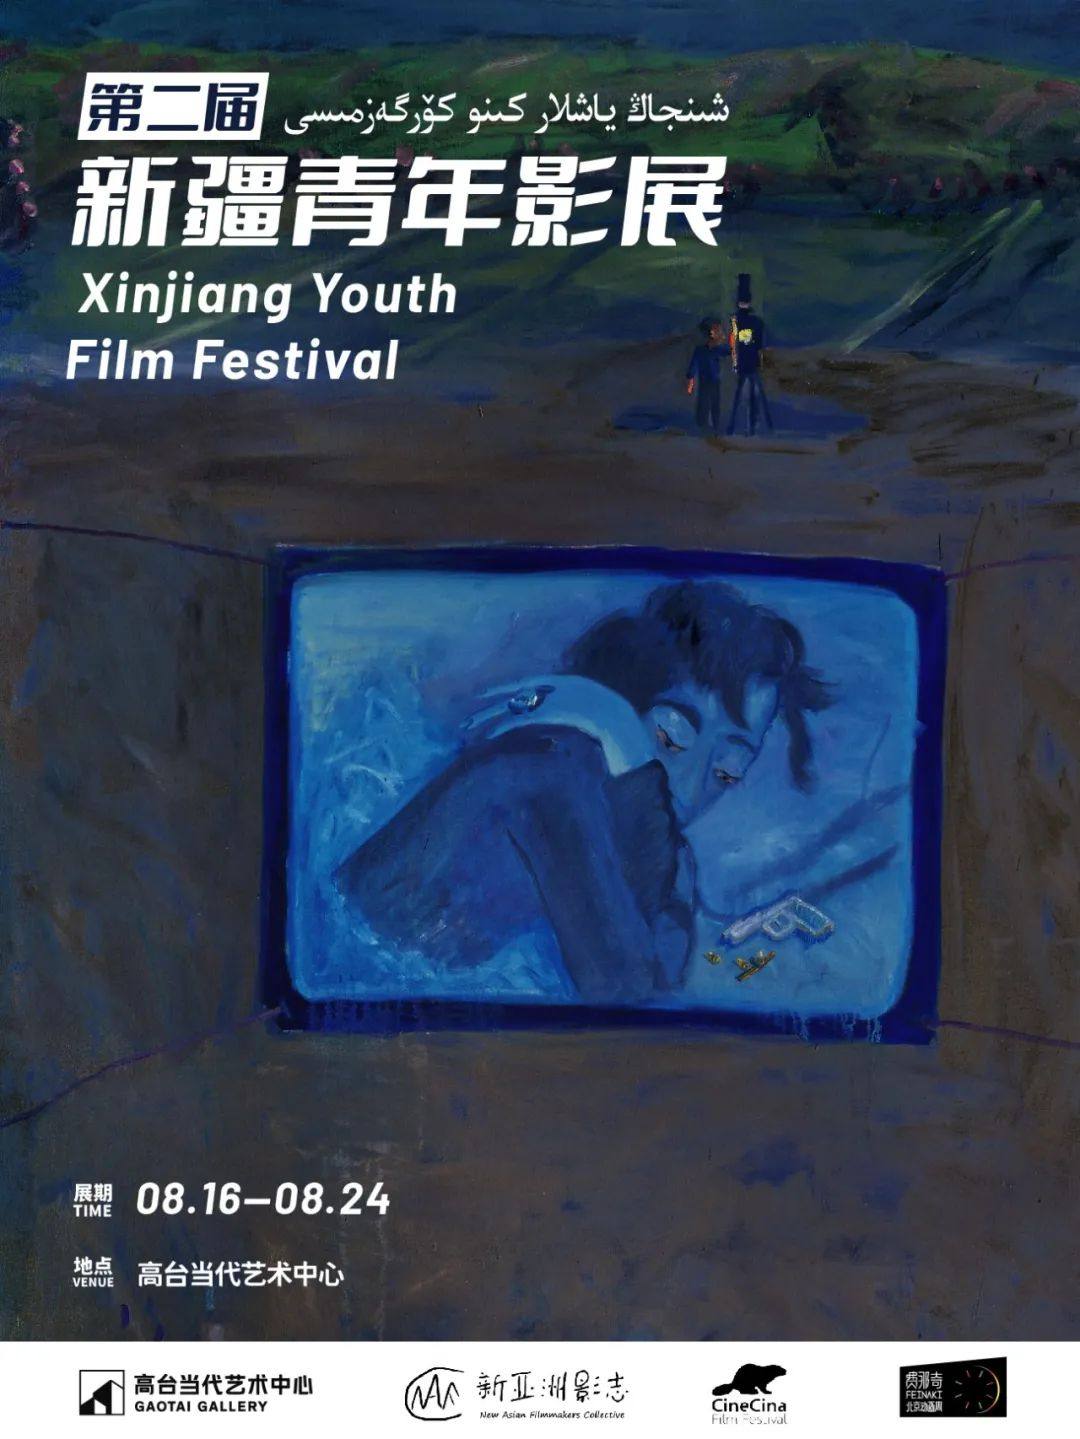 The 2nd Xinjiang Youth Film Festival will be presented from August 16 to August 24 by Gaotai Gallery